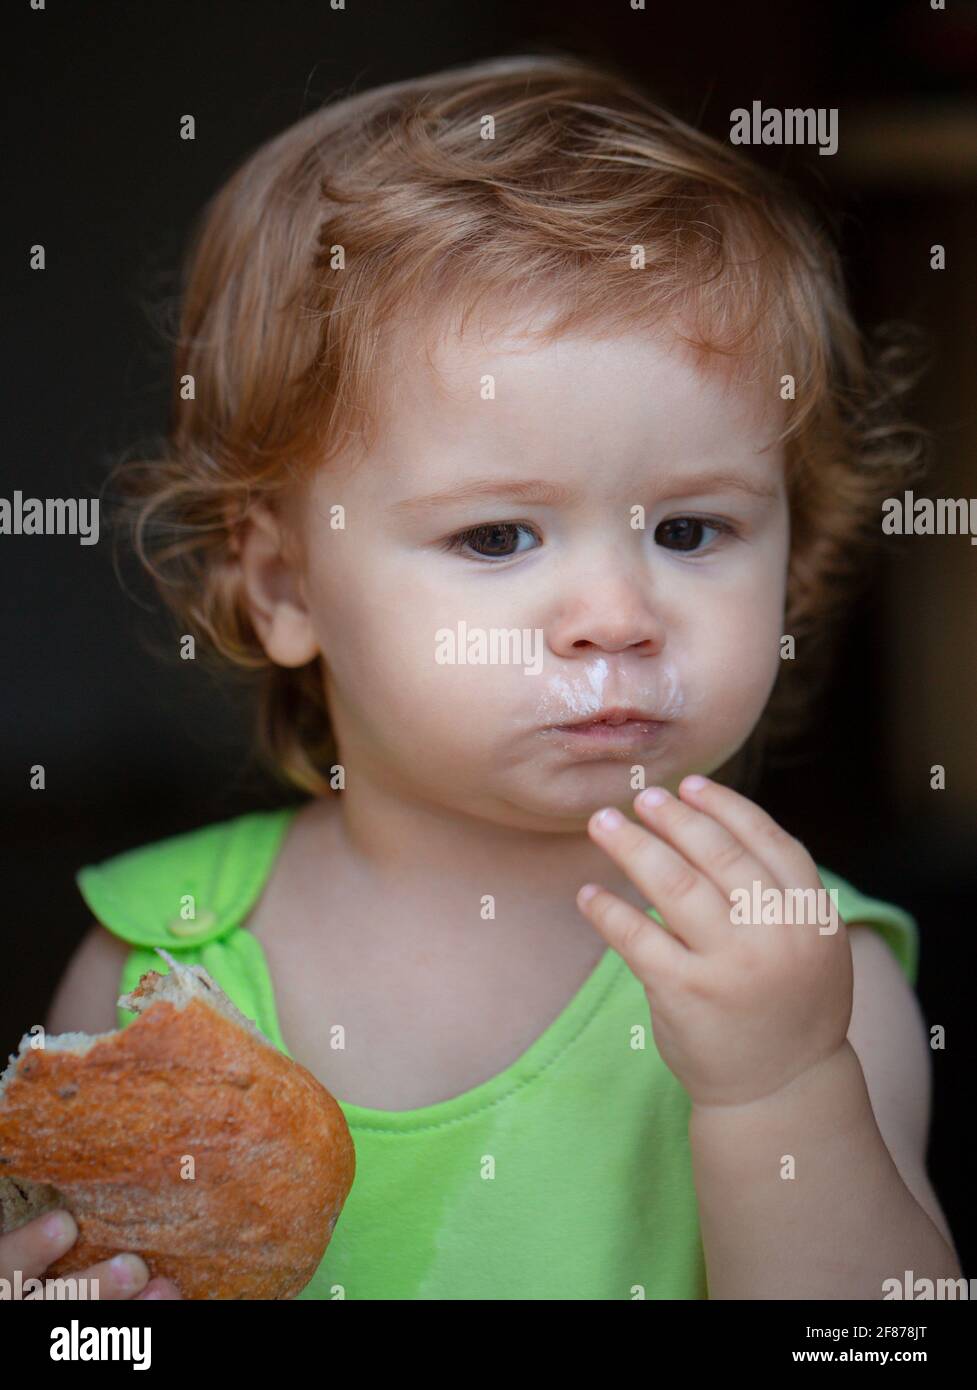 Cute toddler child eating sandwich, self feeding concept. Stock Photo